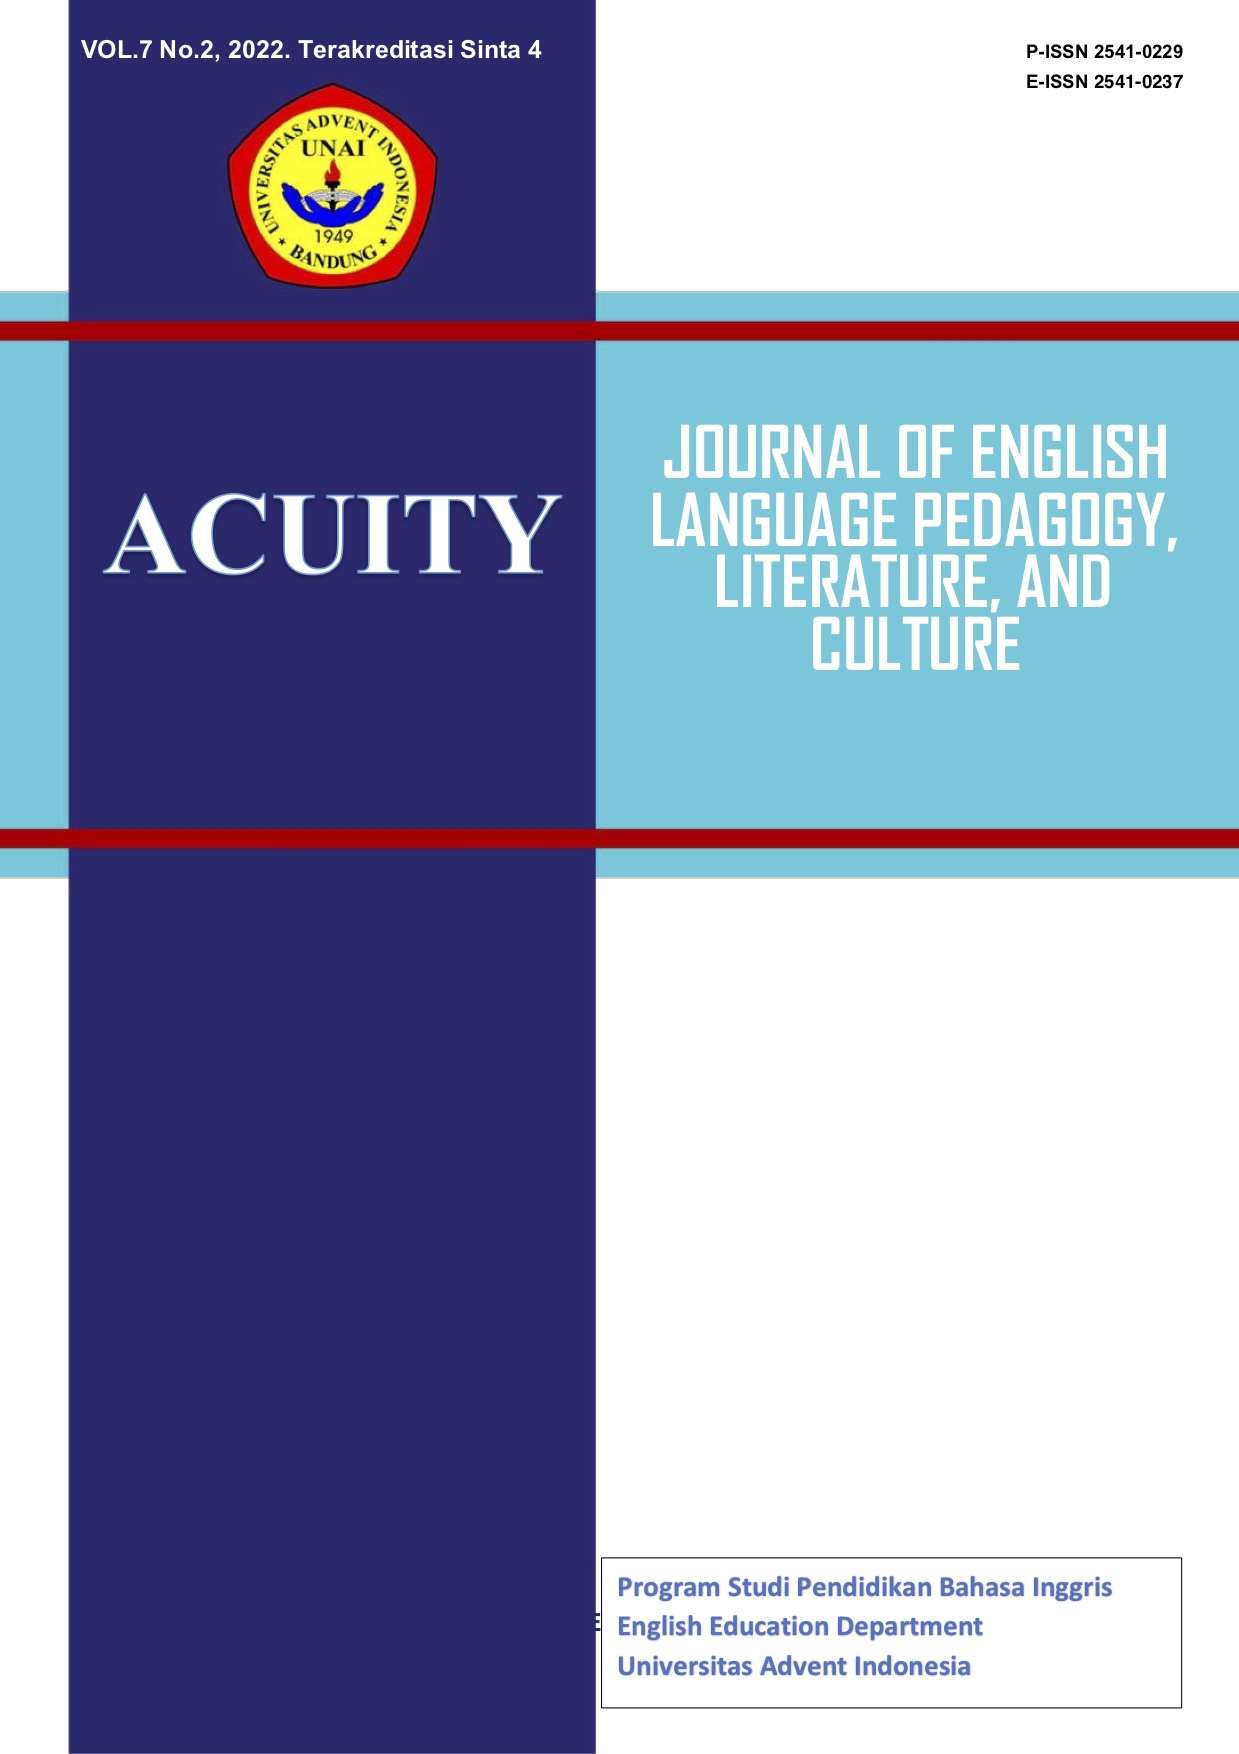 					View Vol. 7 No. 2 (2022): Acuity: Journal of English Language Pedagogy, Literature & Culture
				